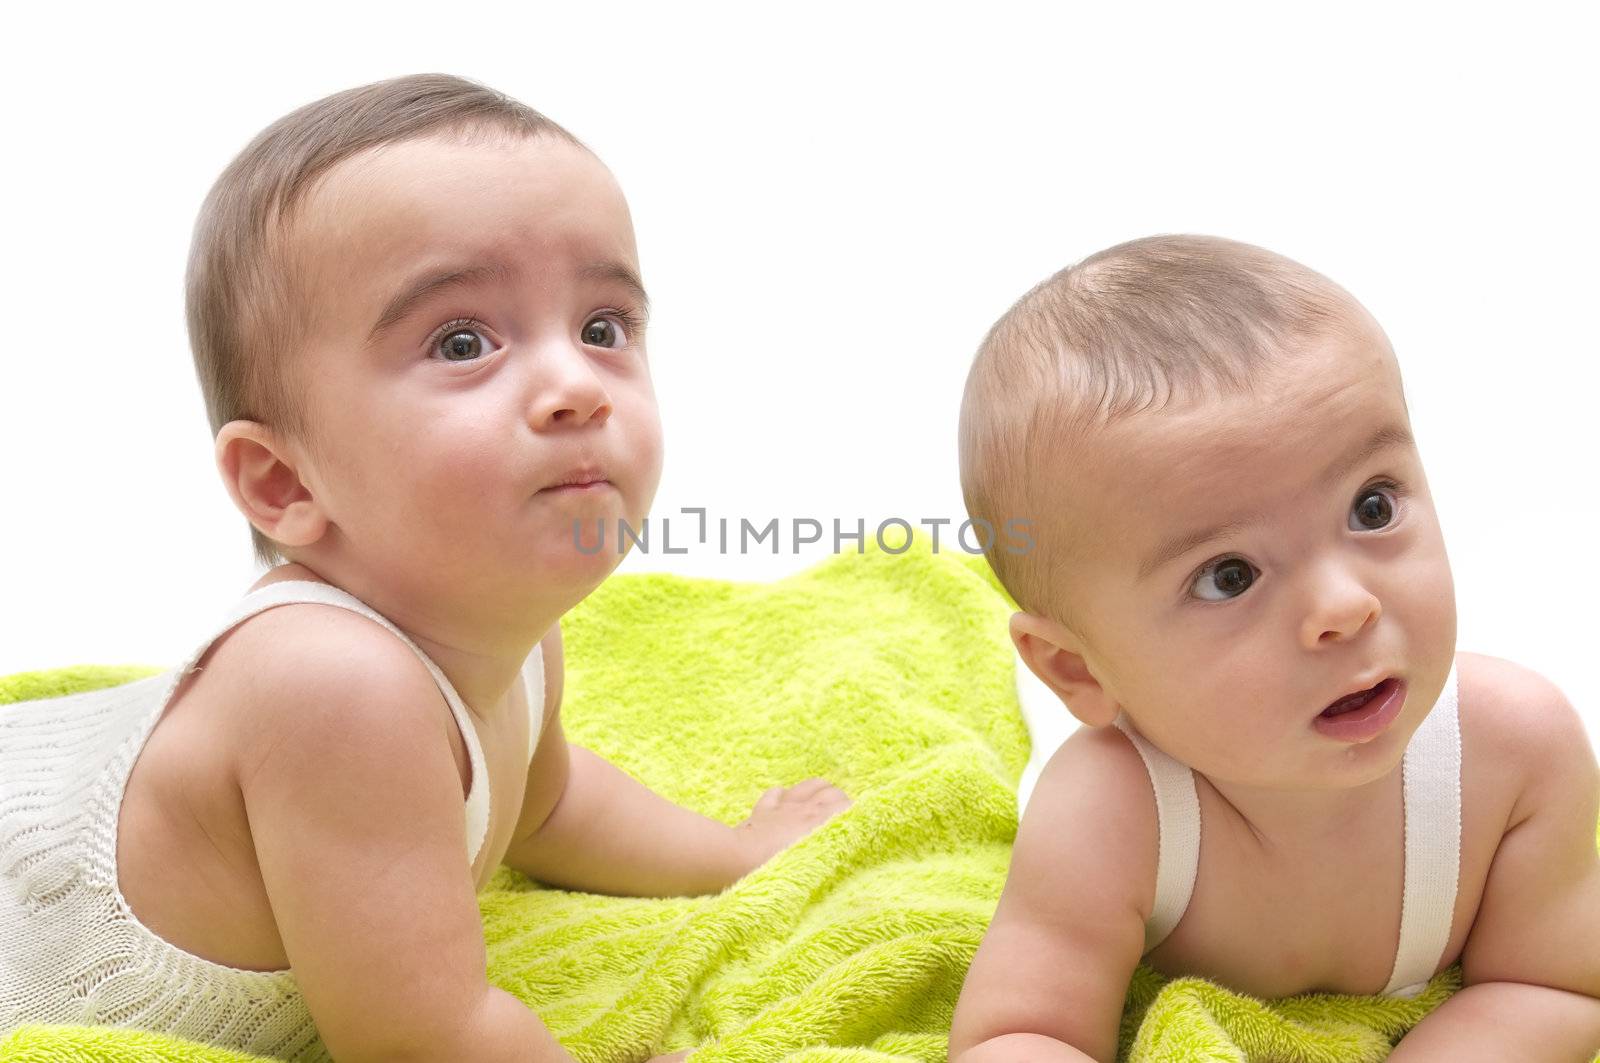 beautiful babies with the green towel on white background
